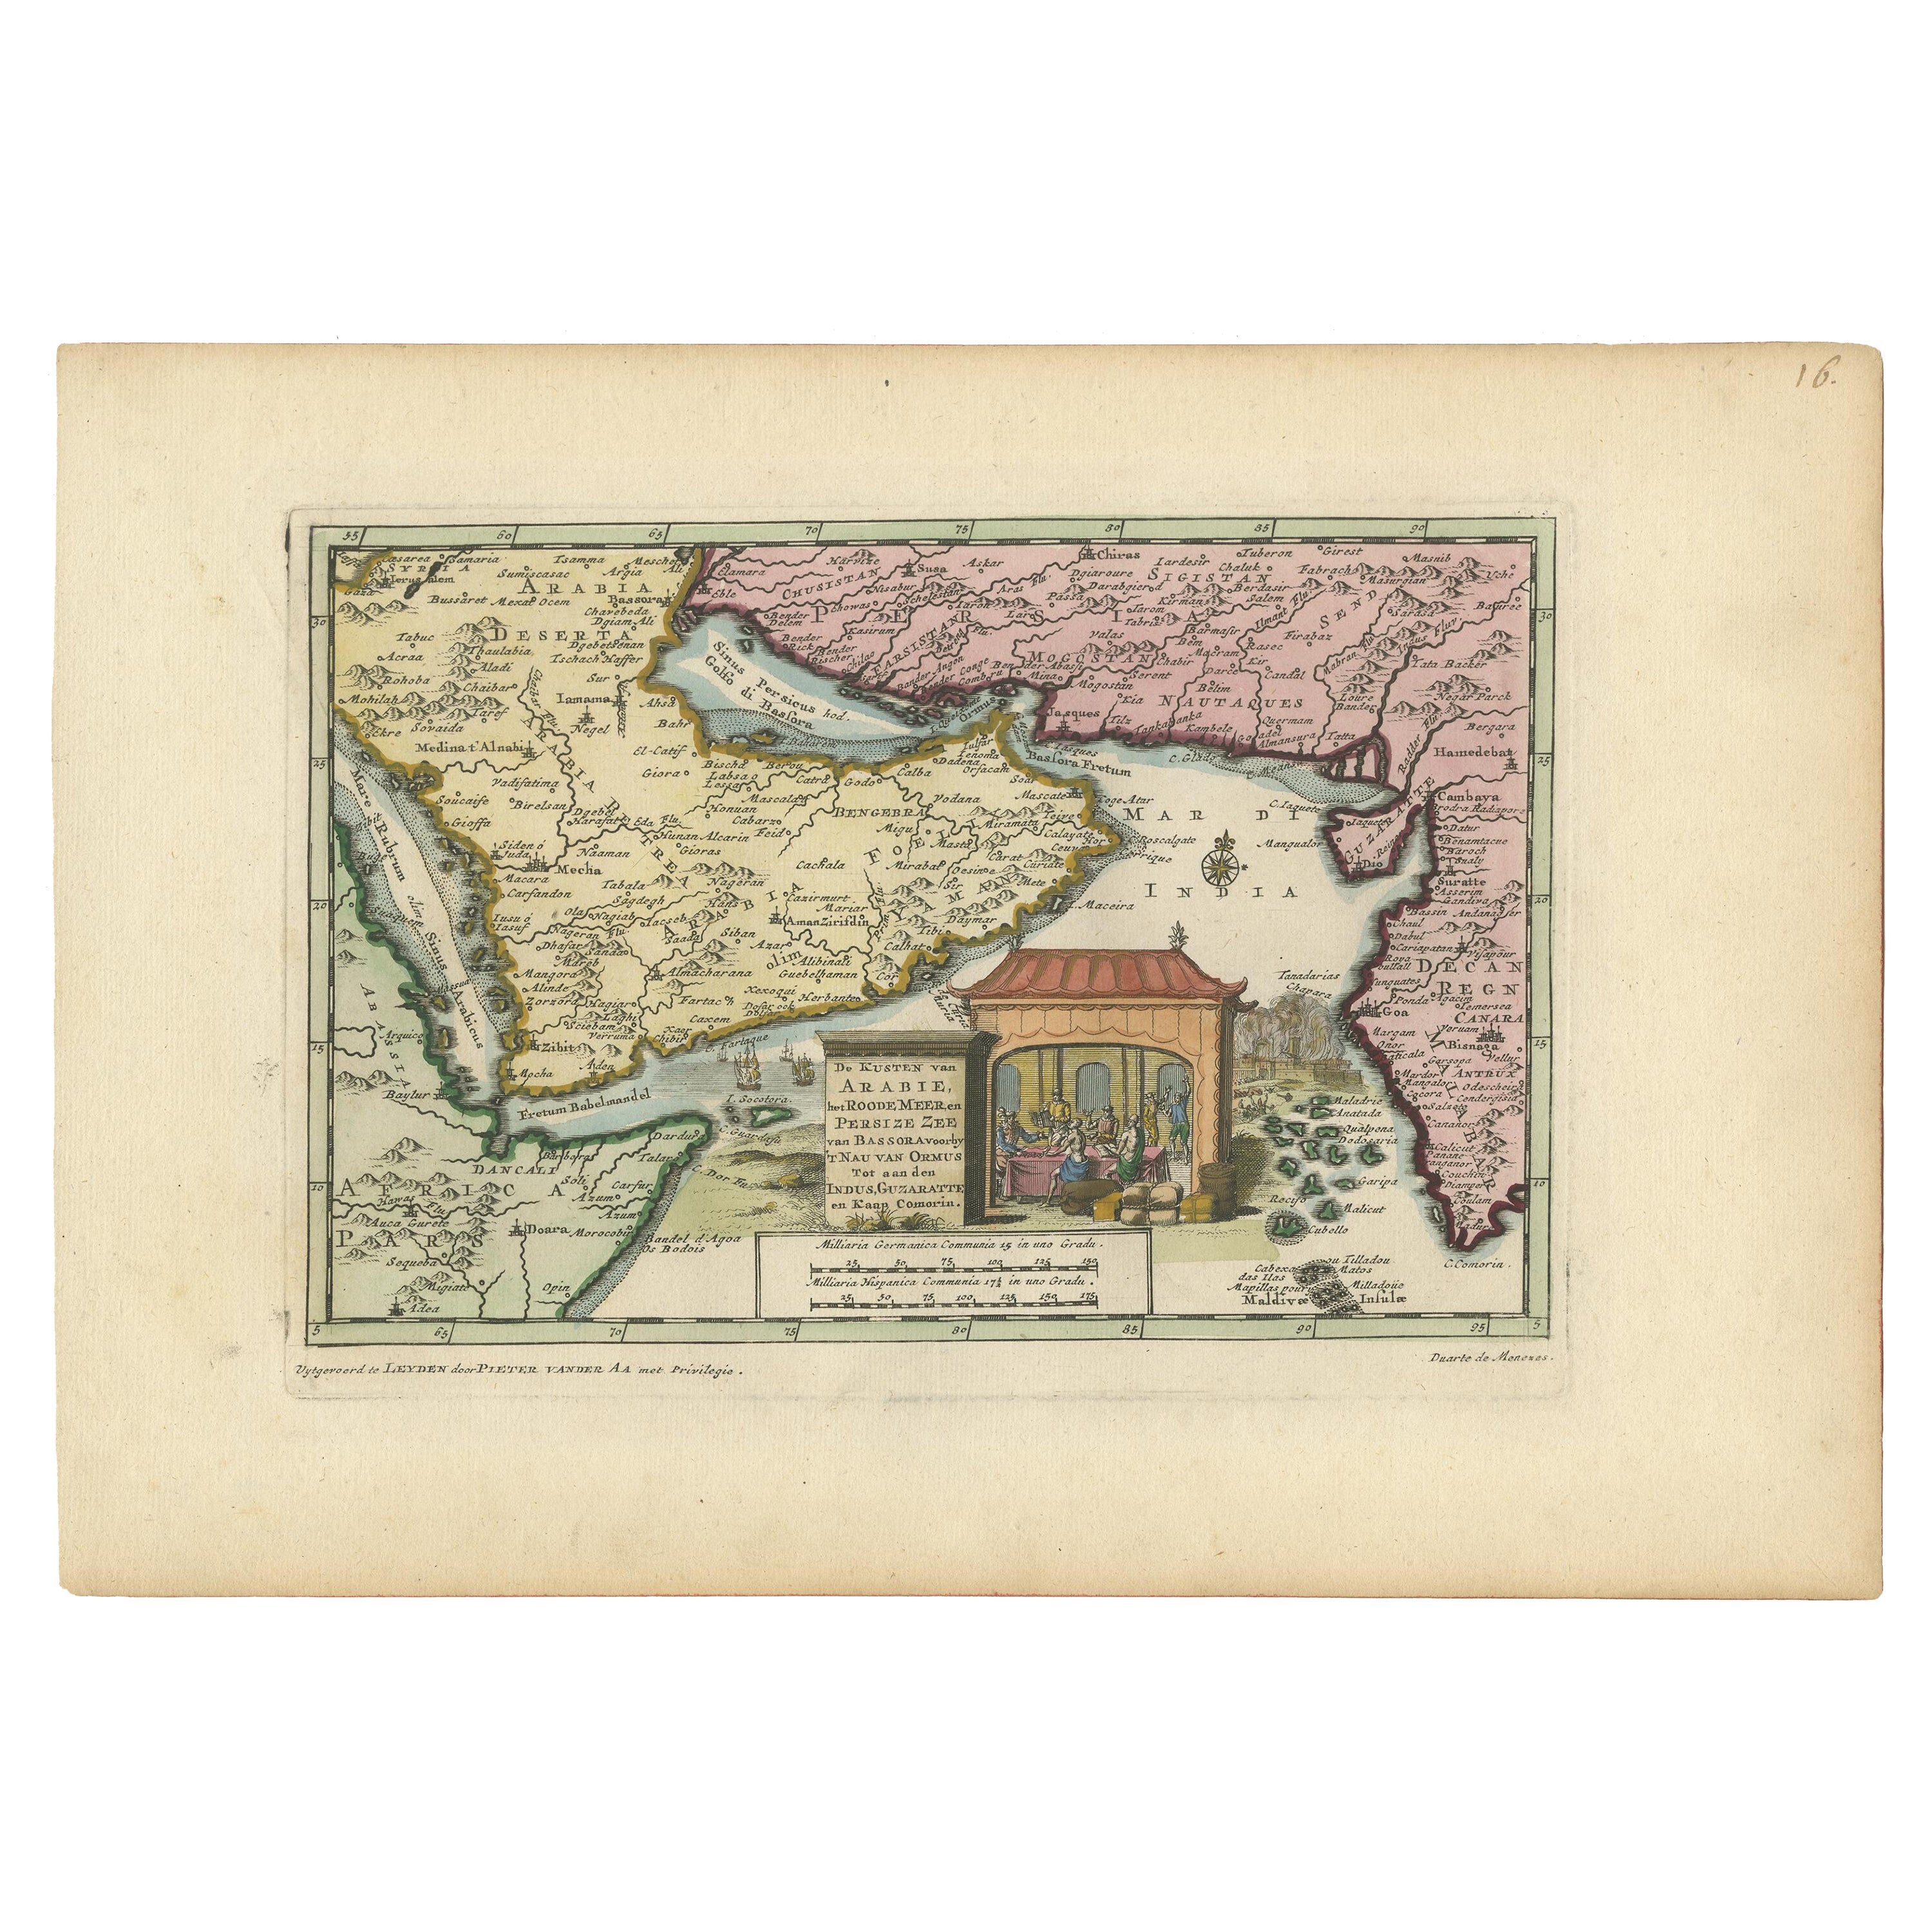 Wonderful Small Map of the Coasts of Arabia, Persia and Western India, ca. 1710